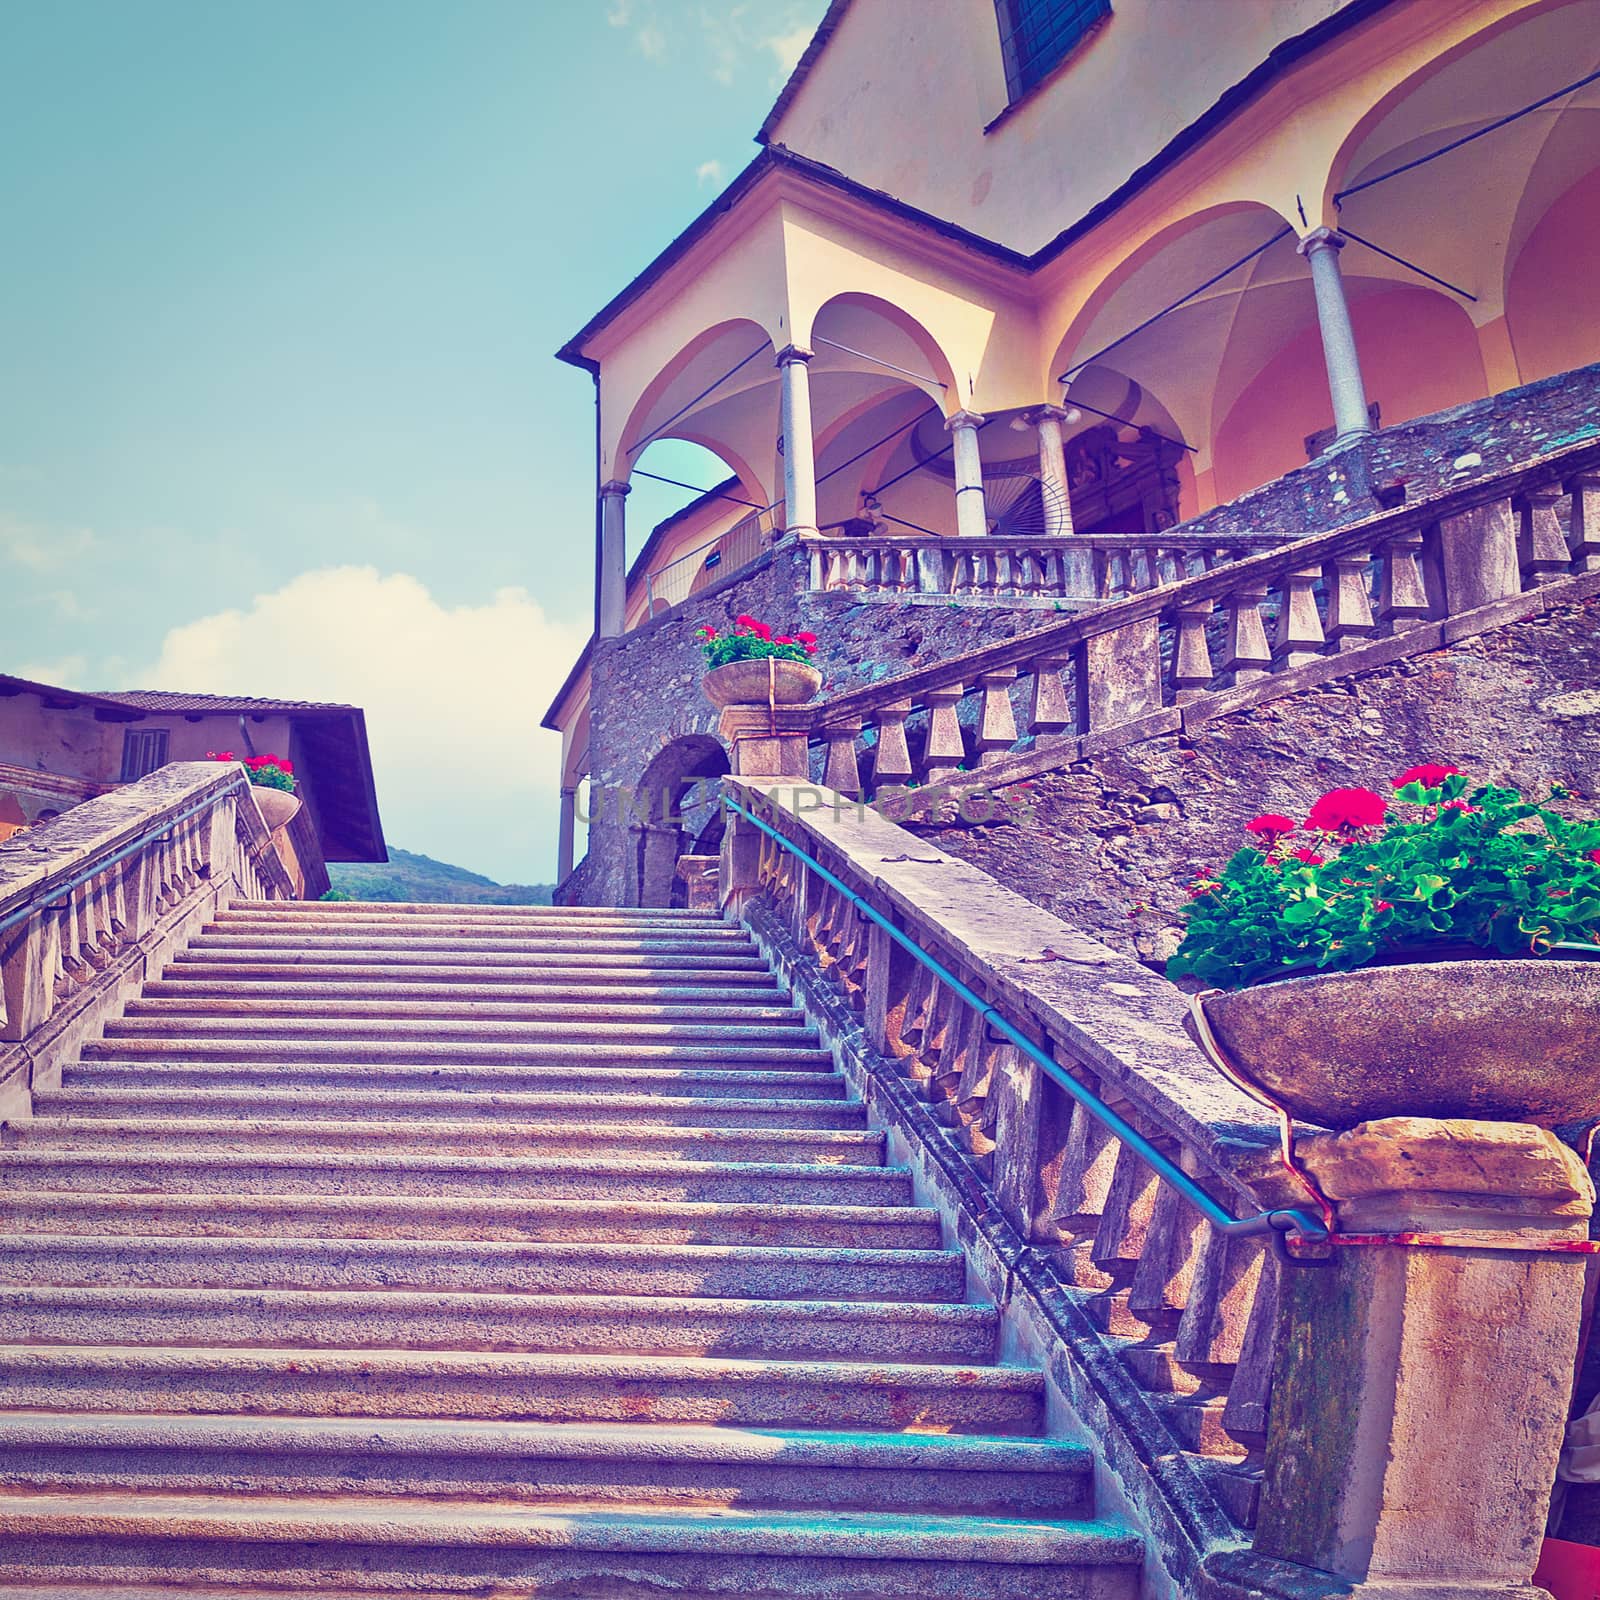 Wide Staircase Leading to the Old Buildings in Italian City in Piedmont, Instagram Effect